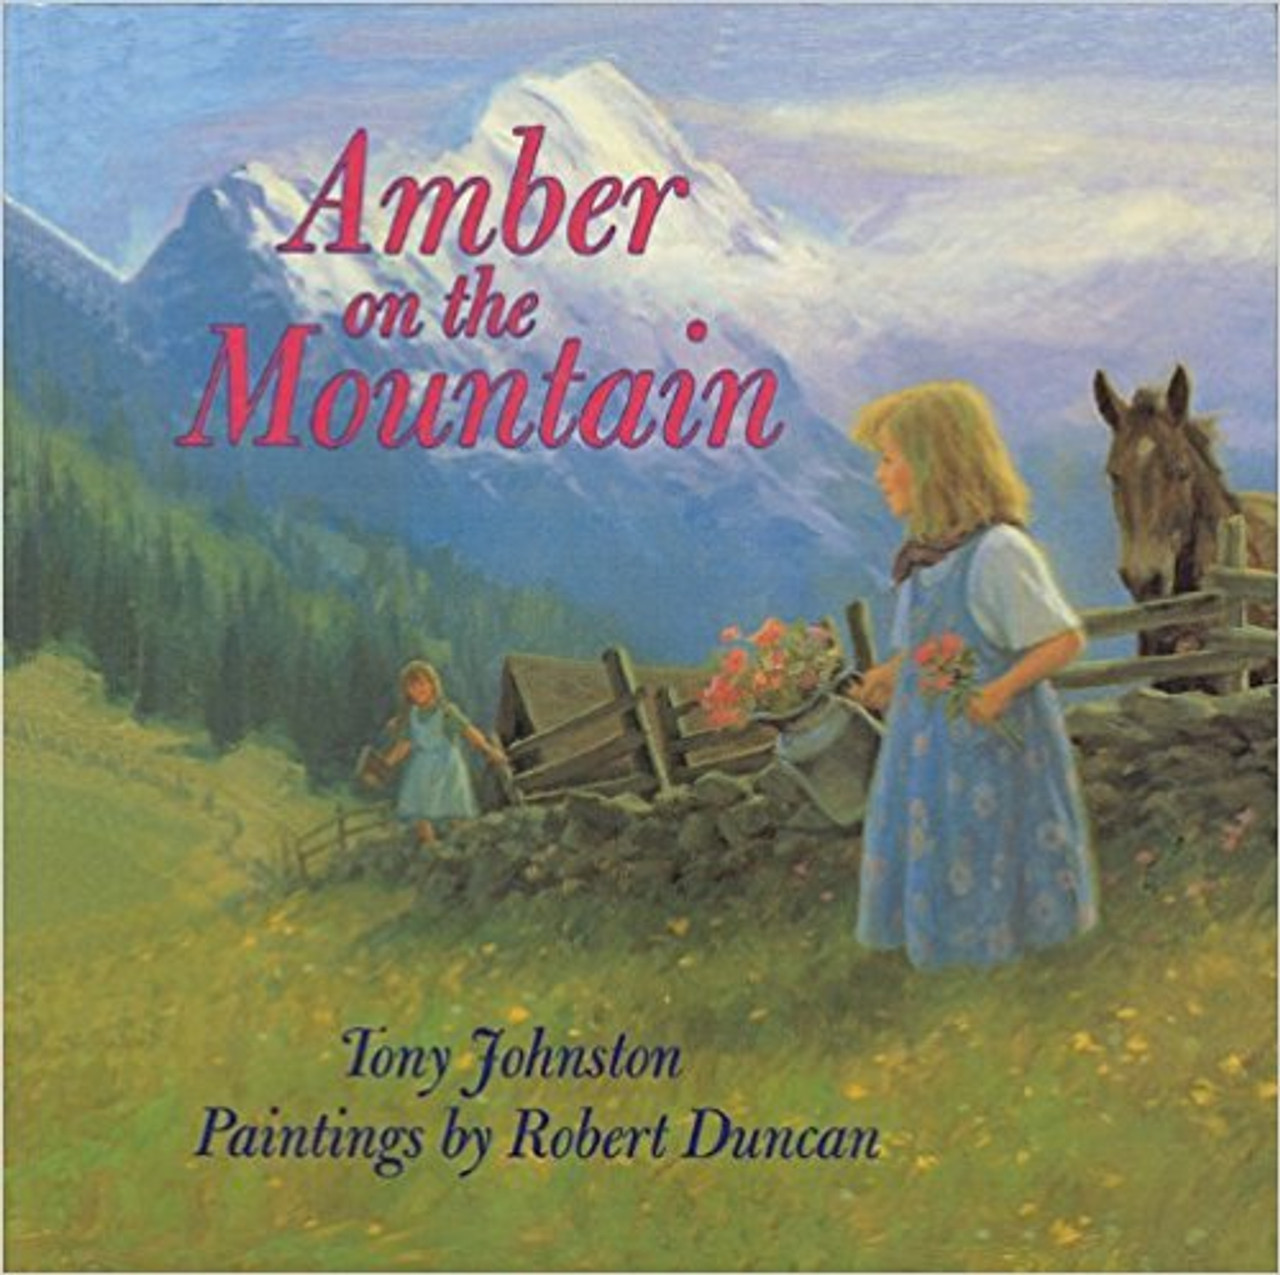 Amber's mountain is a beautiful but lonely place, until the day Anna arrives, bringing both her friendship and the will to teach Amber how to read. Suddenly, Amber's world is filled with new magic--and new challenges. But when Anna returns to the city, will Amber be able to keep reading on her own? "Heartwarming".--"Publishers Weekly", starred review. Full color.